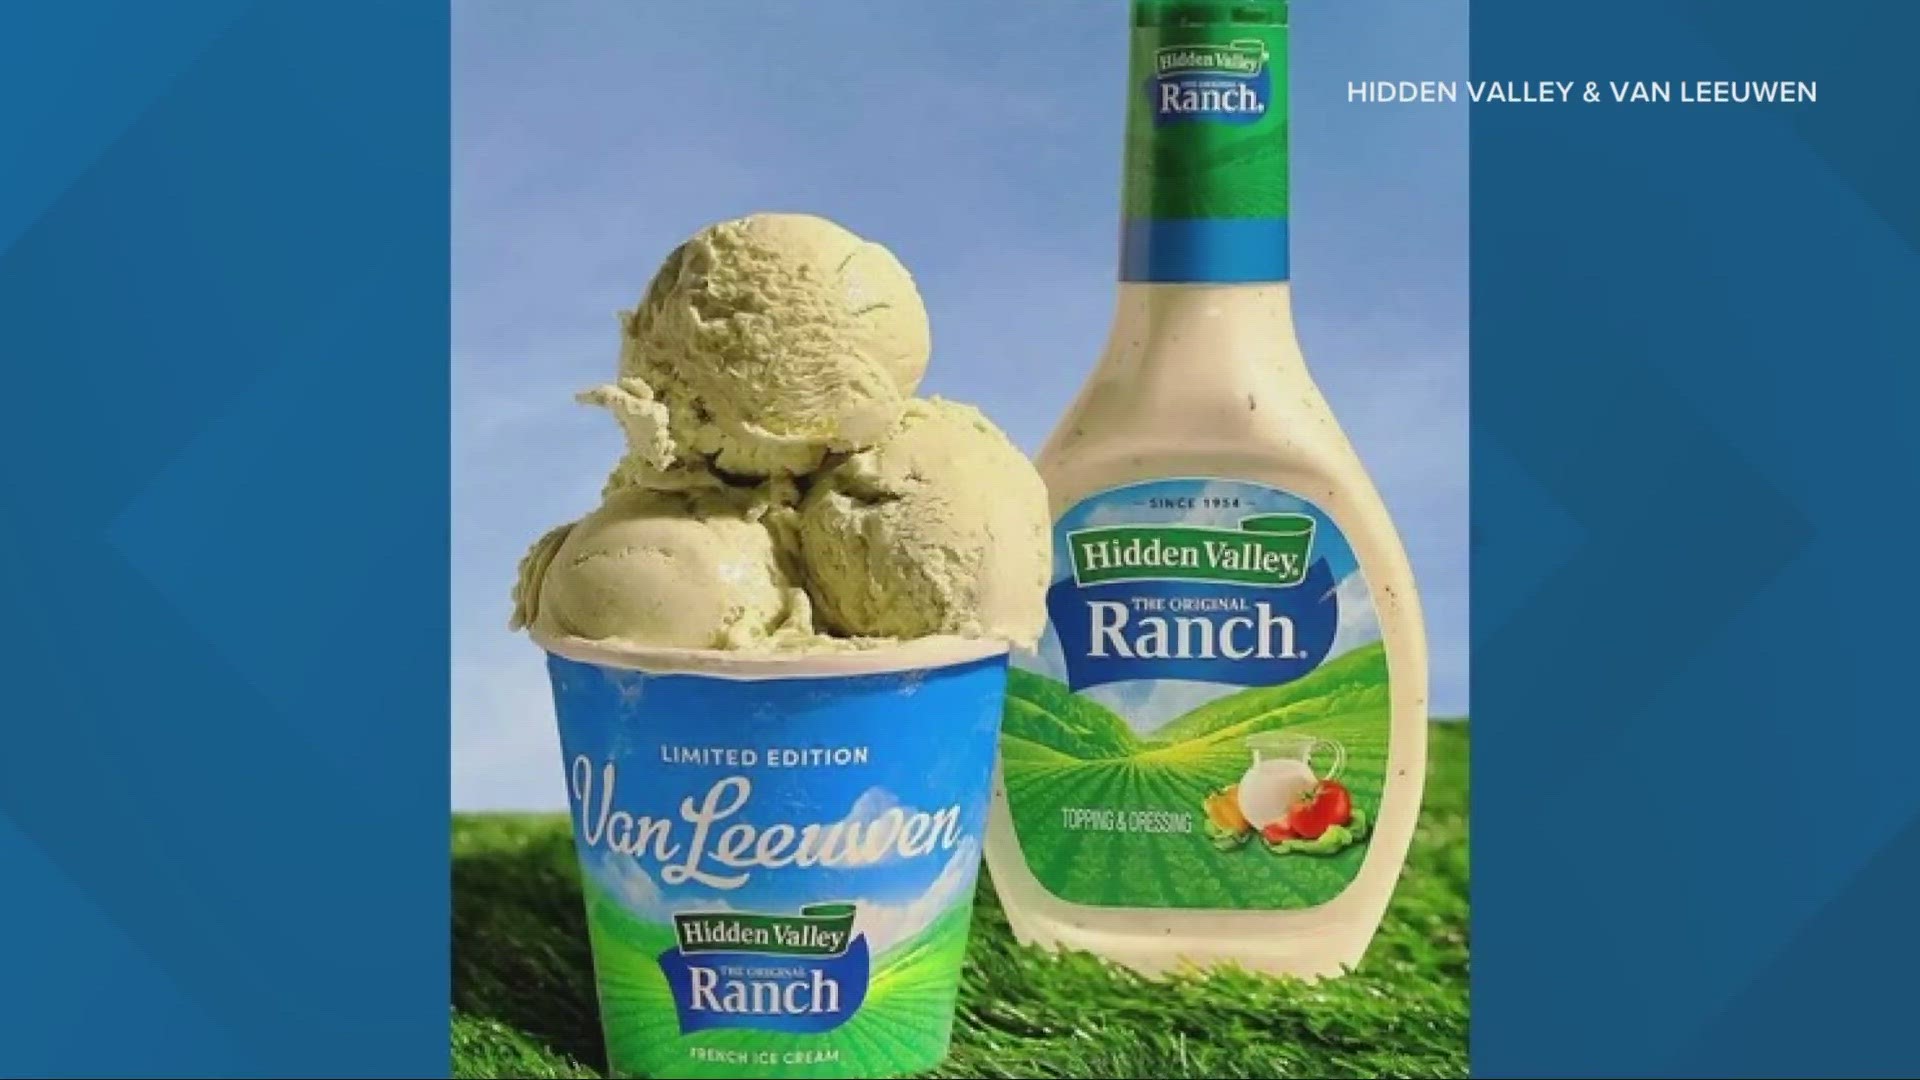 Rachel Garrison with Hidden Valley Ranch encouraged ice cream lovers to 'top your scoops with crushed pretzels or potato chips for a perfect salty crunch.'